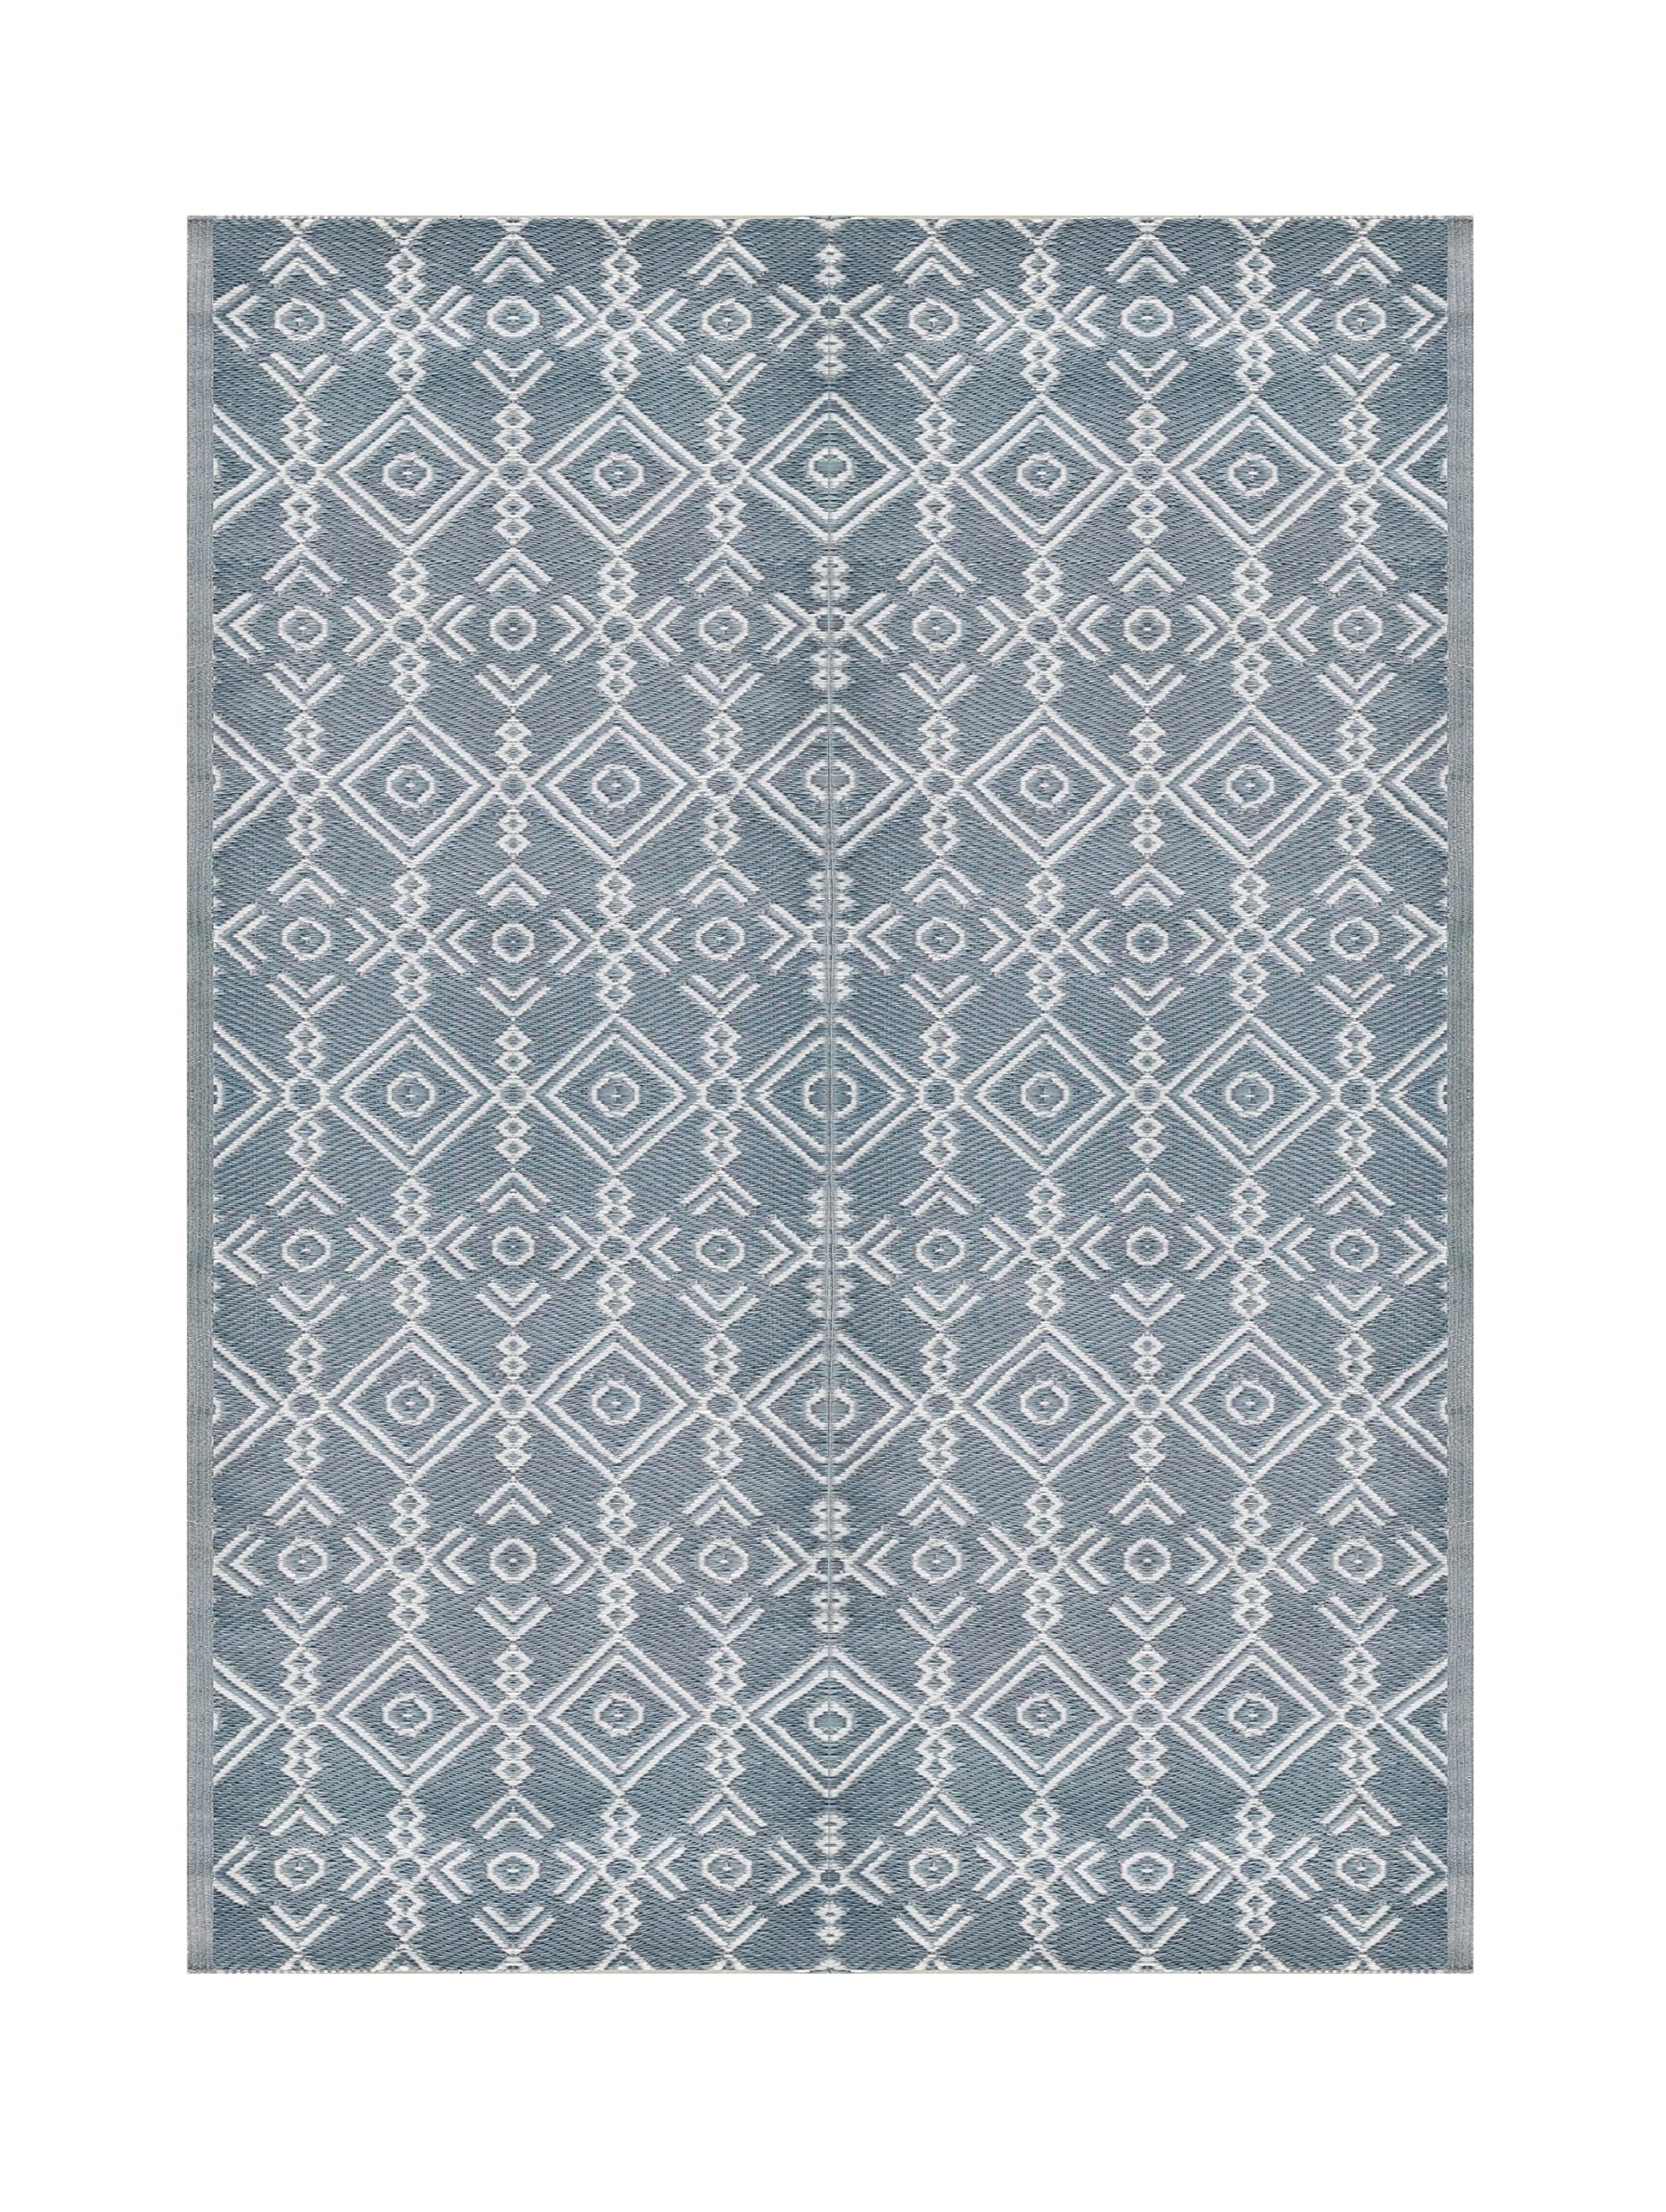 BalajeesUSA Outdoor Rugs Plastic Straw Patio rugs-6 by 9 Feet. Grey,Teal Reversible Mats Waterproof Camper Mats Patio Rugs Clearance. 7018, Size: 6' x